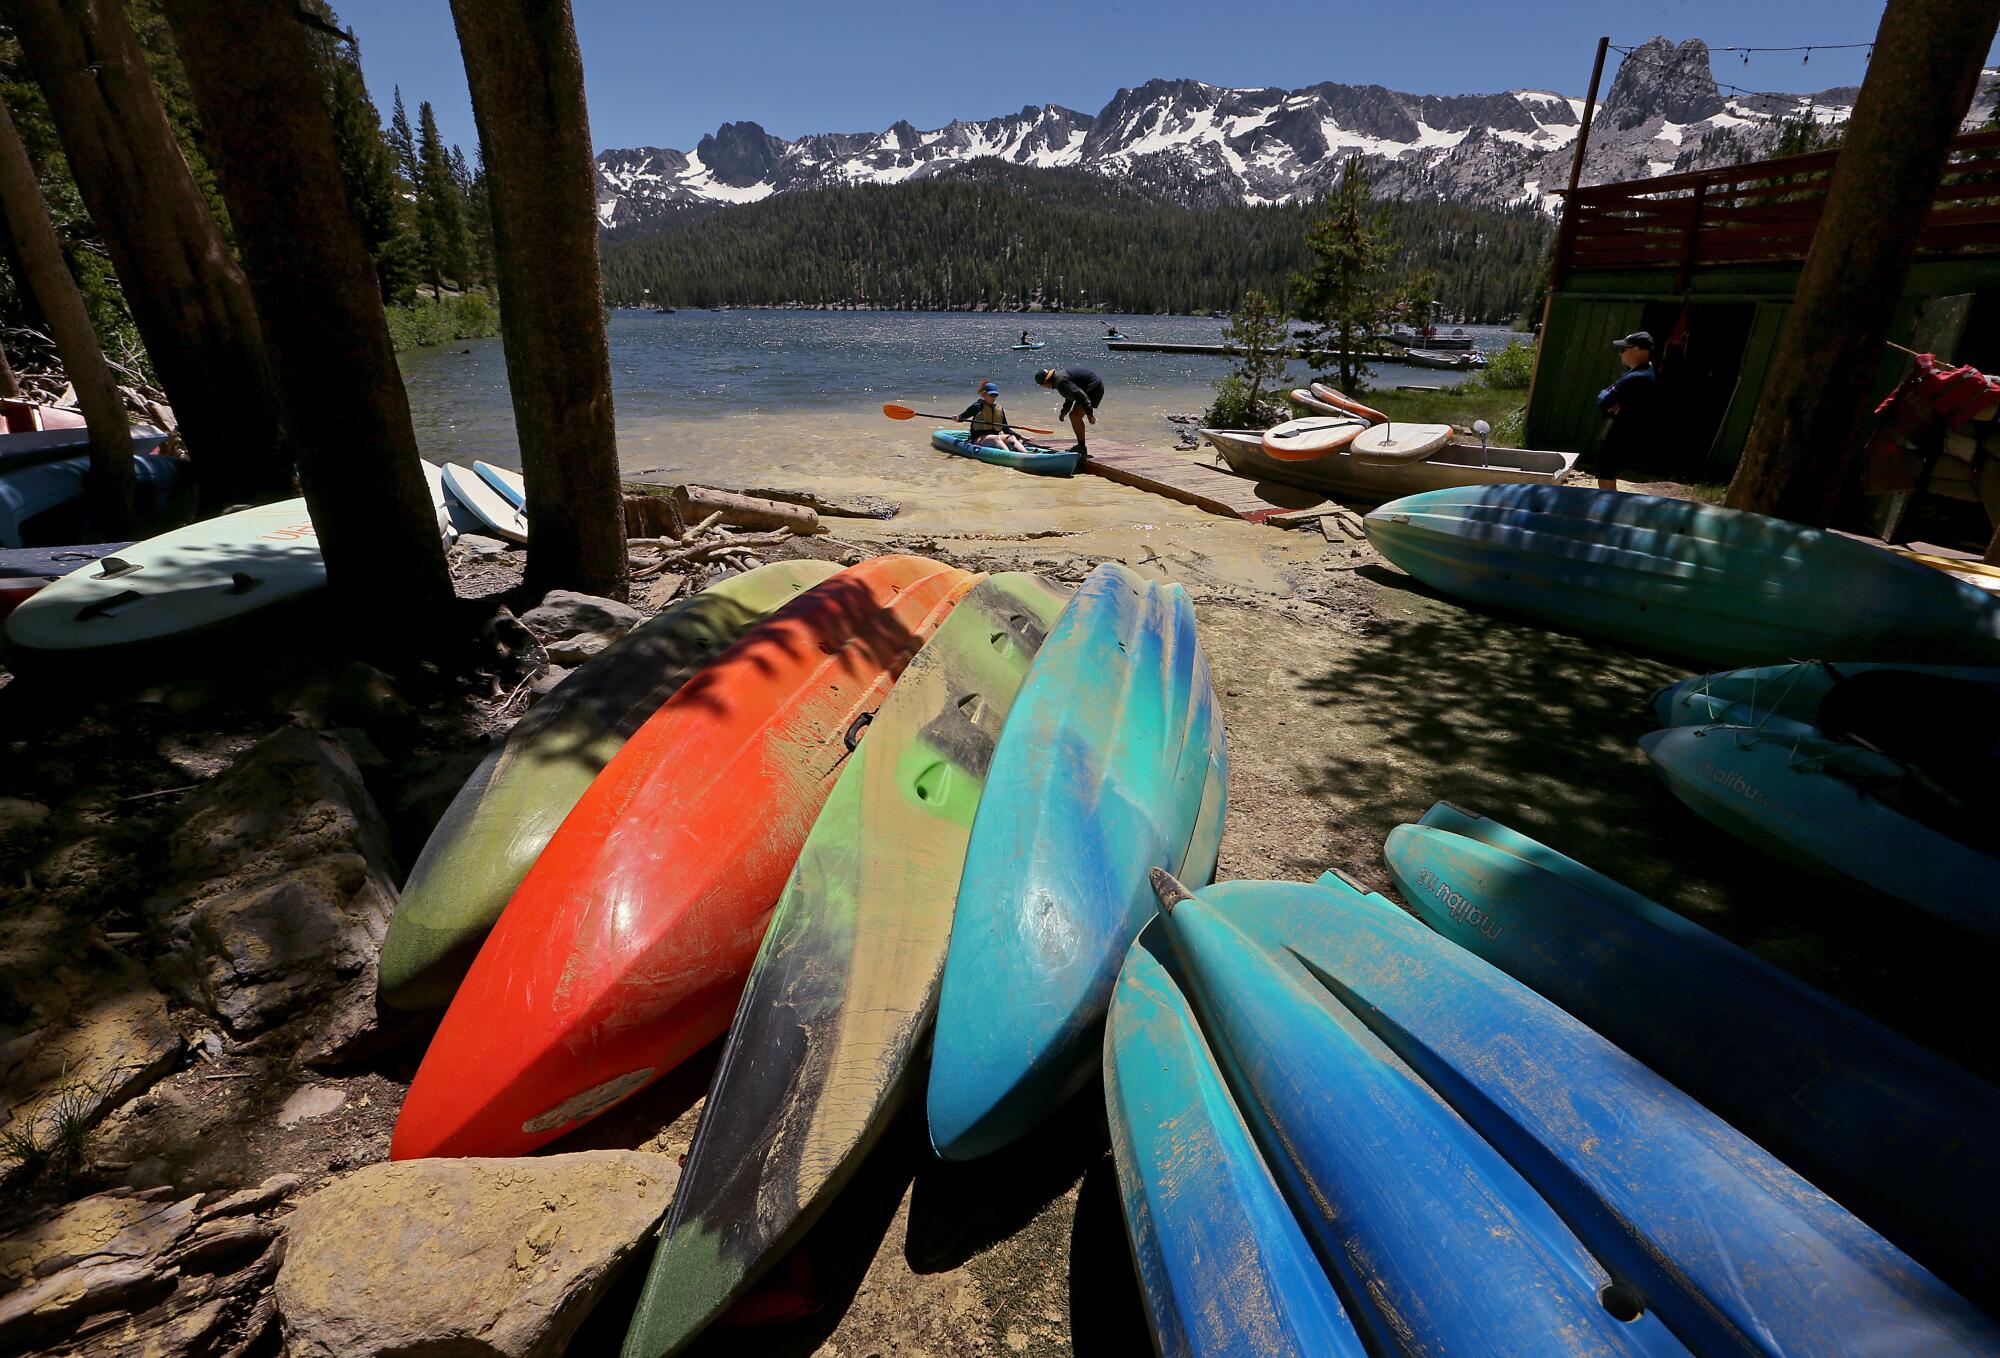 A kayaker returns to shore after paddling around Lake Mary in the Mammoth Lakes basin.